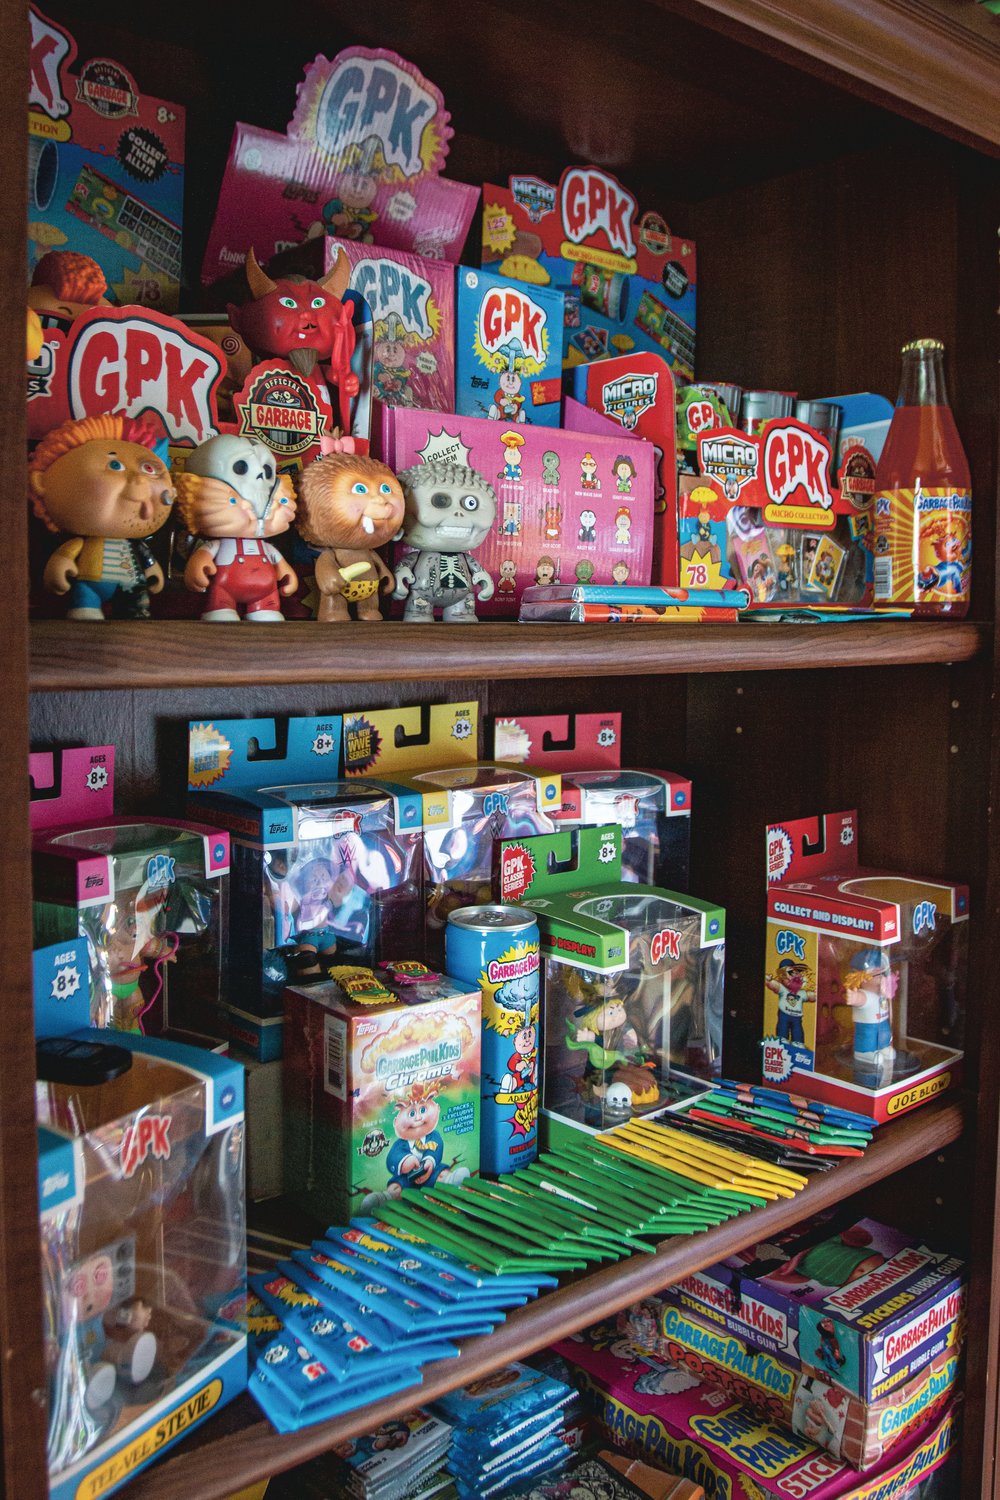 The Garbage Pail Kids fill an entire book shelf as part of Zane’s collection of vintage toys. This shelf has figurines, trading cards, stickers, candies and drinks — all part of the Garbage Pail Kids collection.